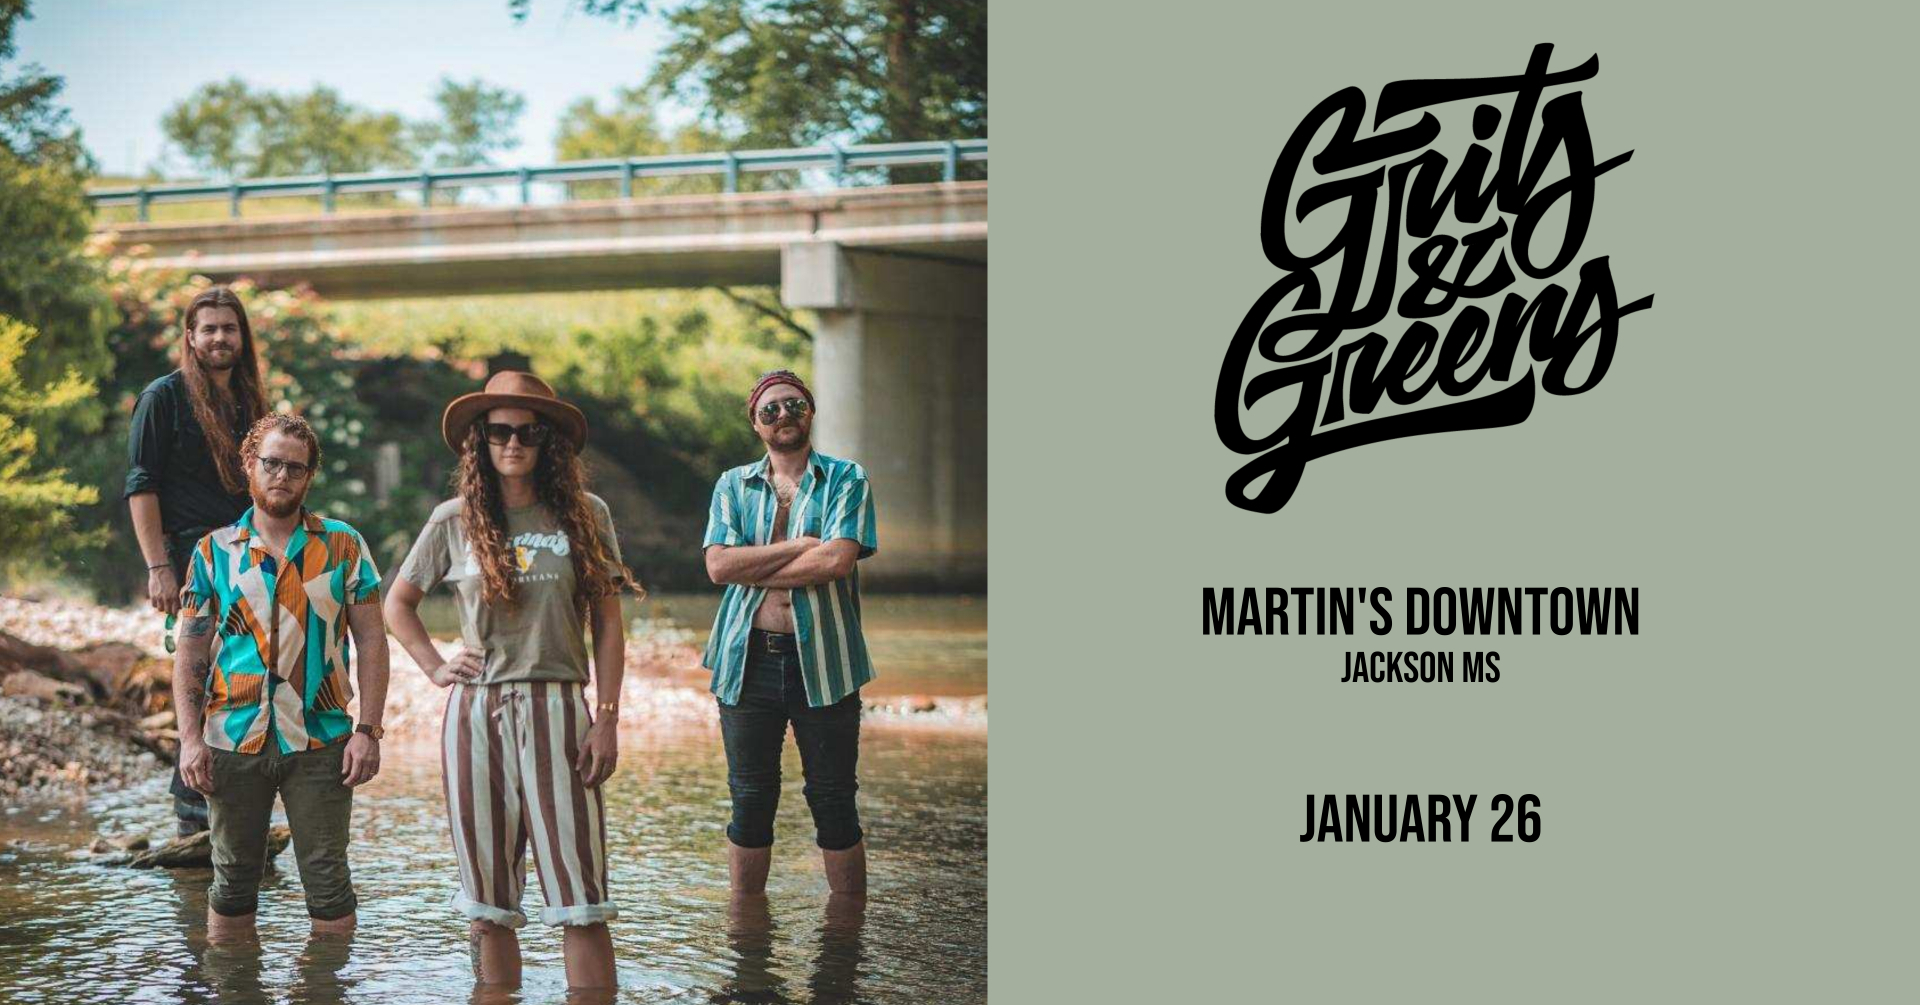 Grits & Greens Live at Martin’s Downtown